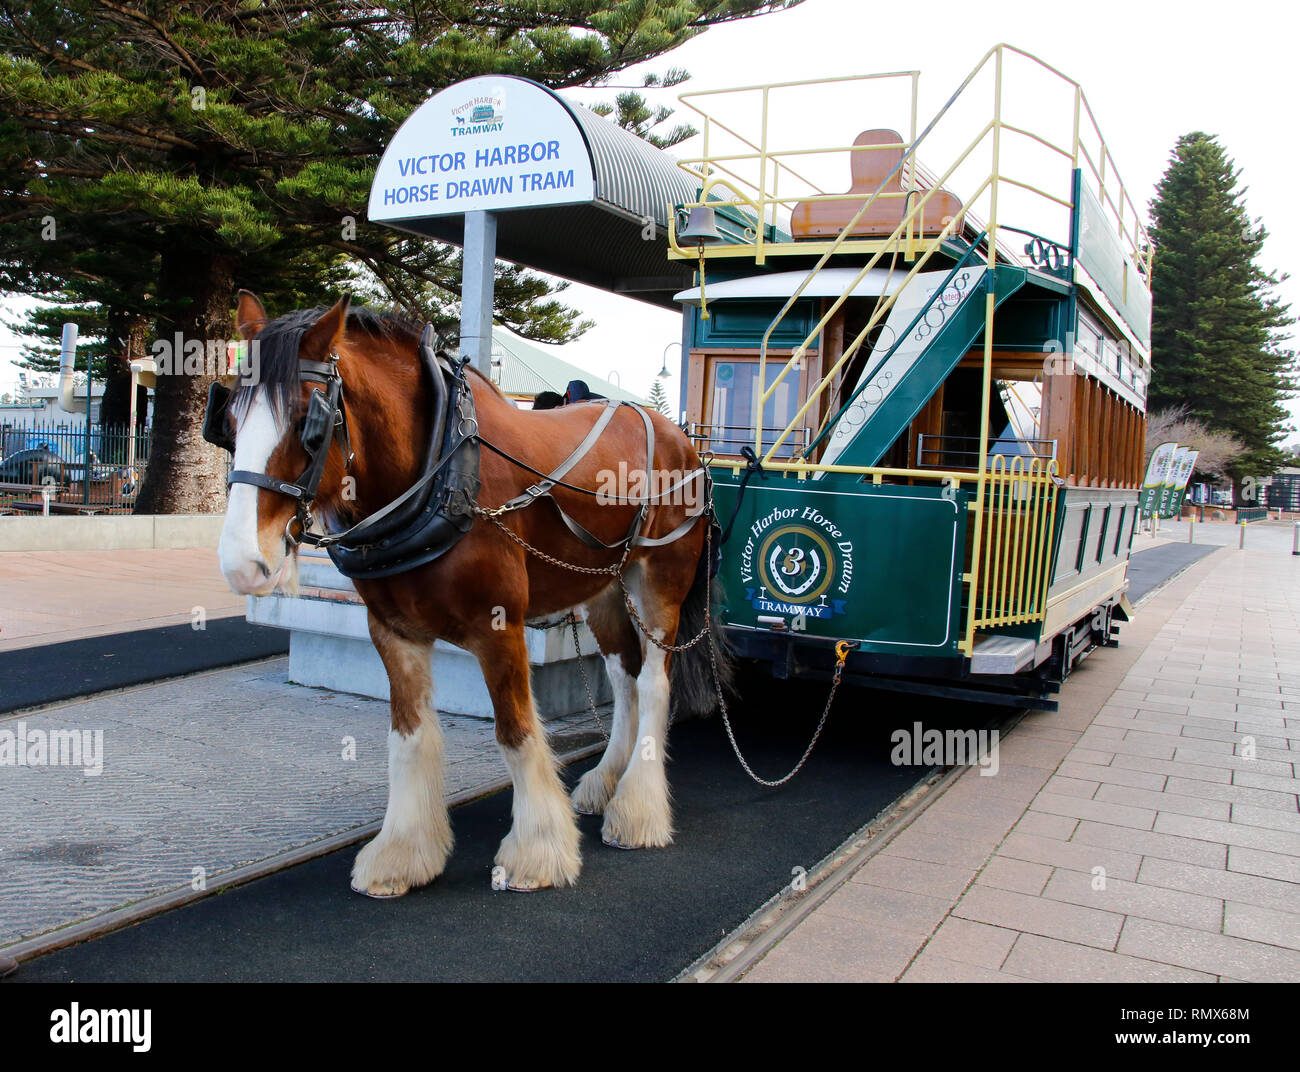 Horse drawn tram at Victor Harbour Stock Photo